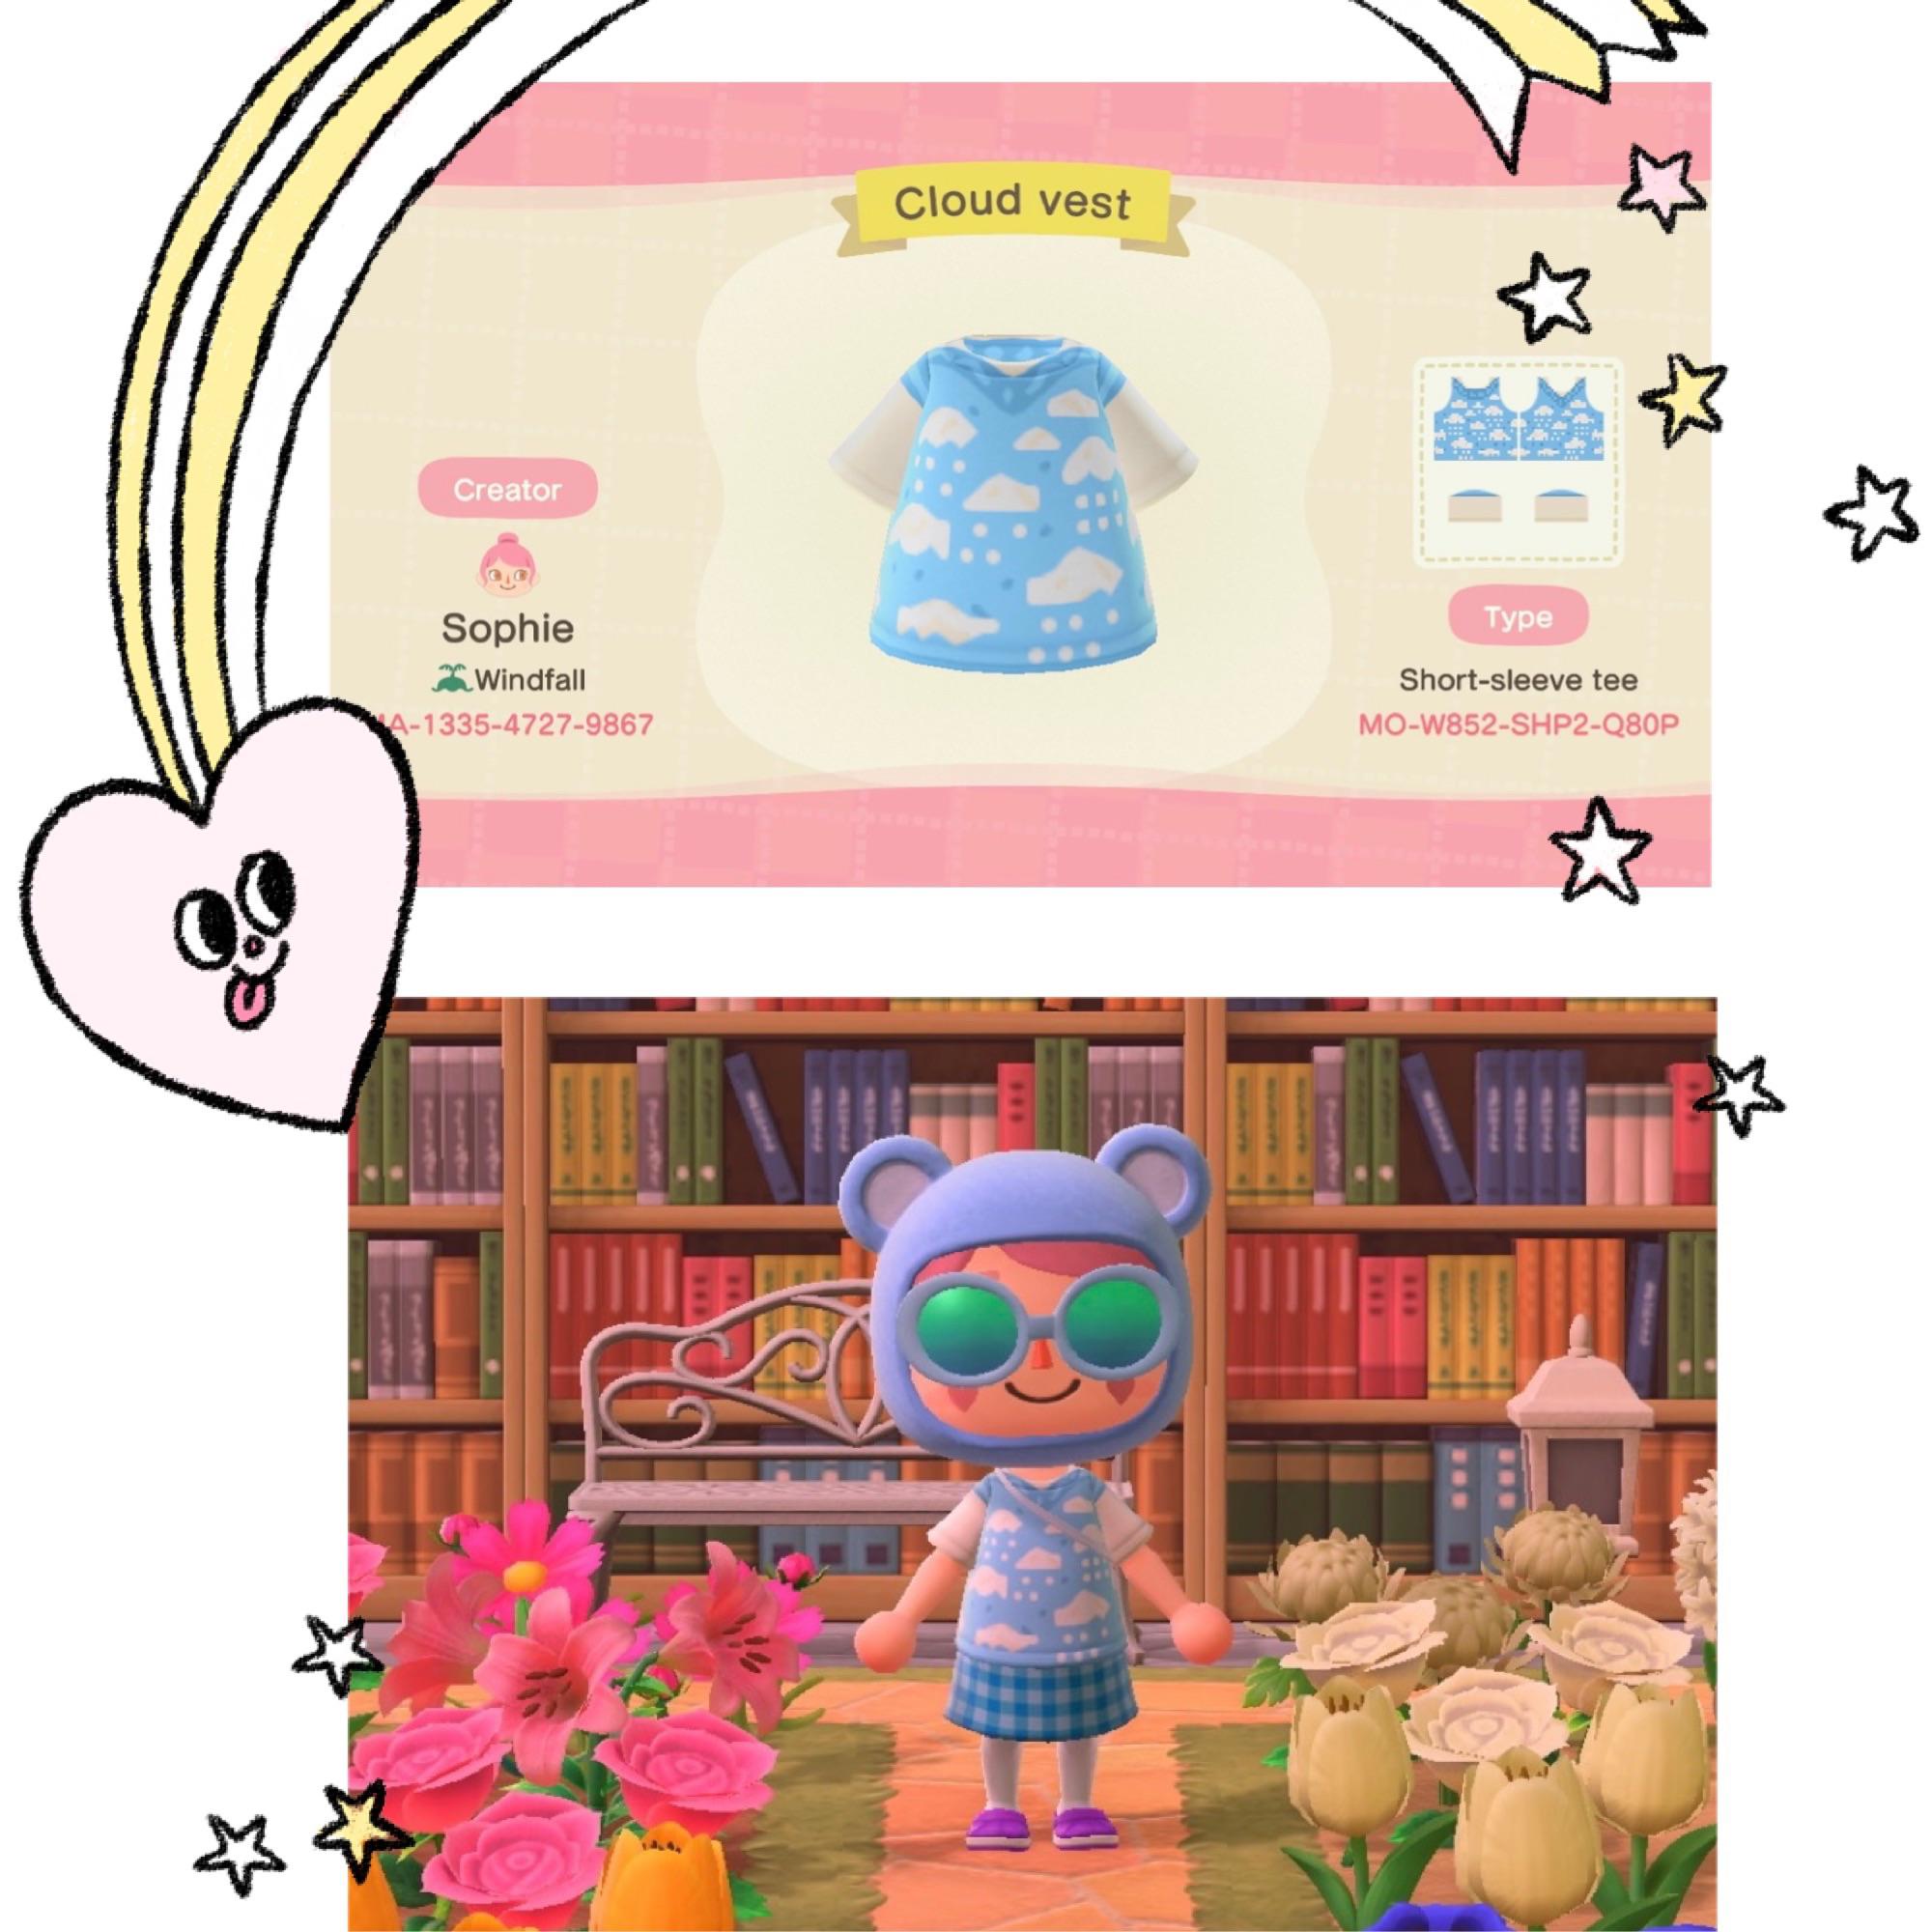 ✨?I have been obsessed with wearing my cloud sweater vest lately so I decided to make it in animal crossing?✨